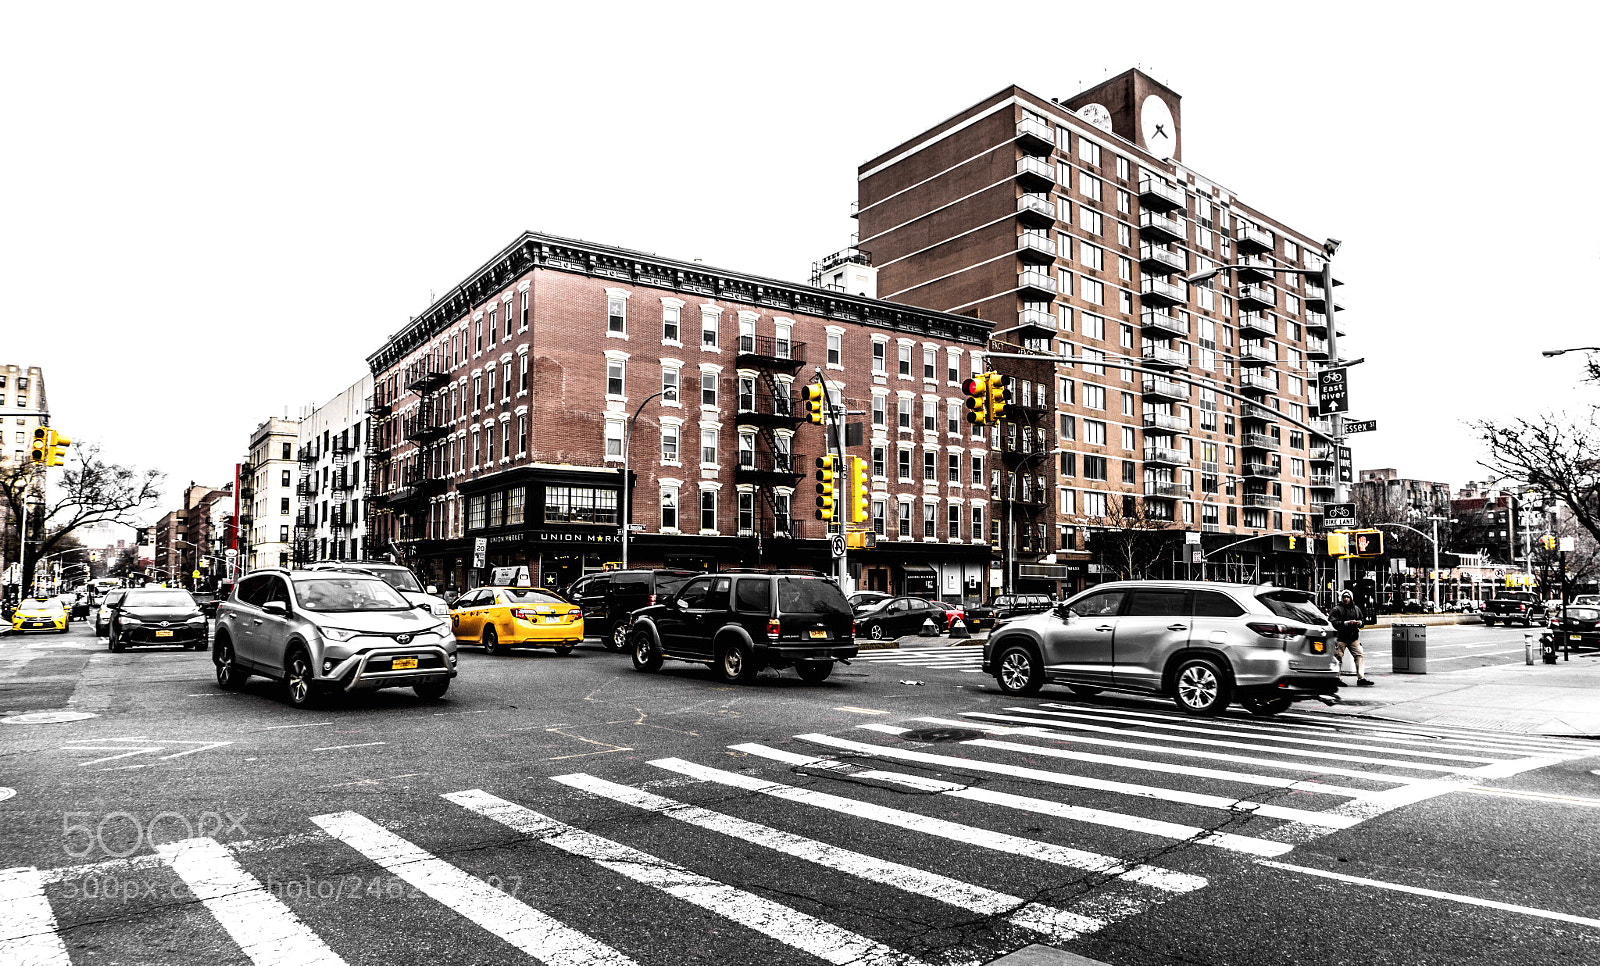 Sony a6000 sample photo. East village, new york photography